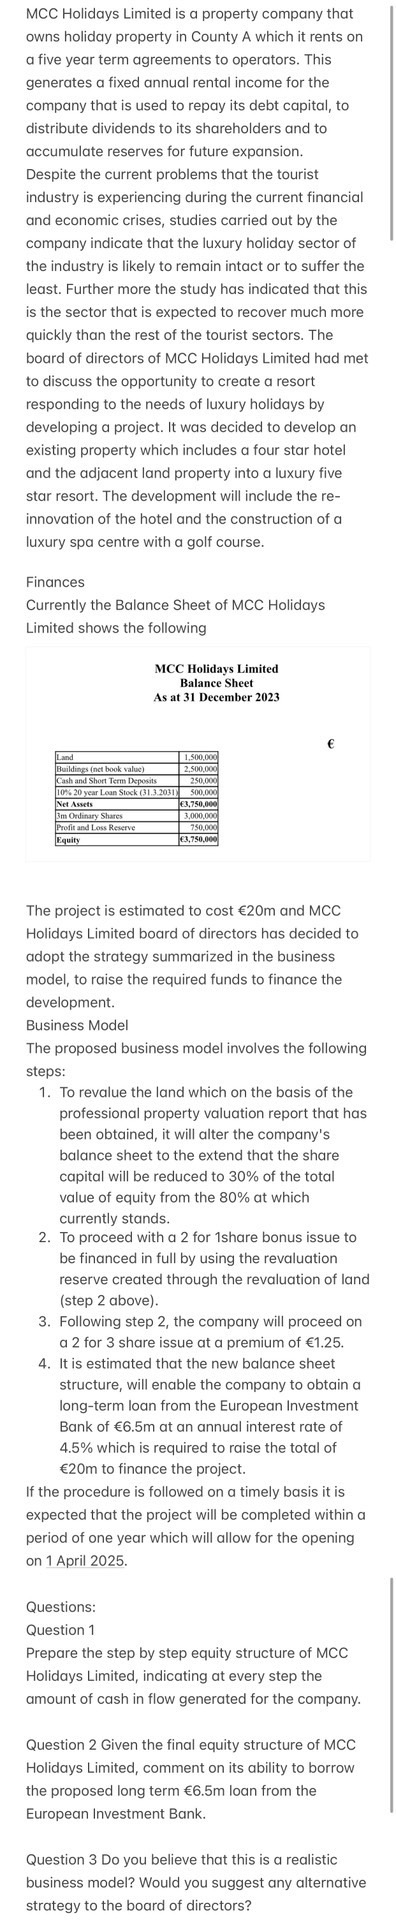 MCC Holidays Limited is a property company that owns holiday property in County A which it rents on a five